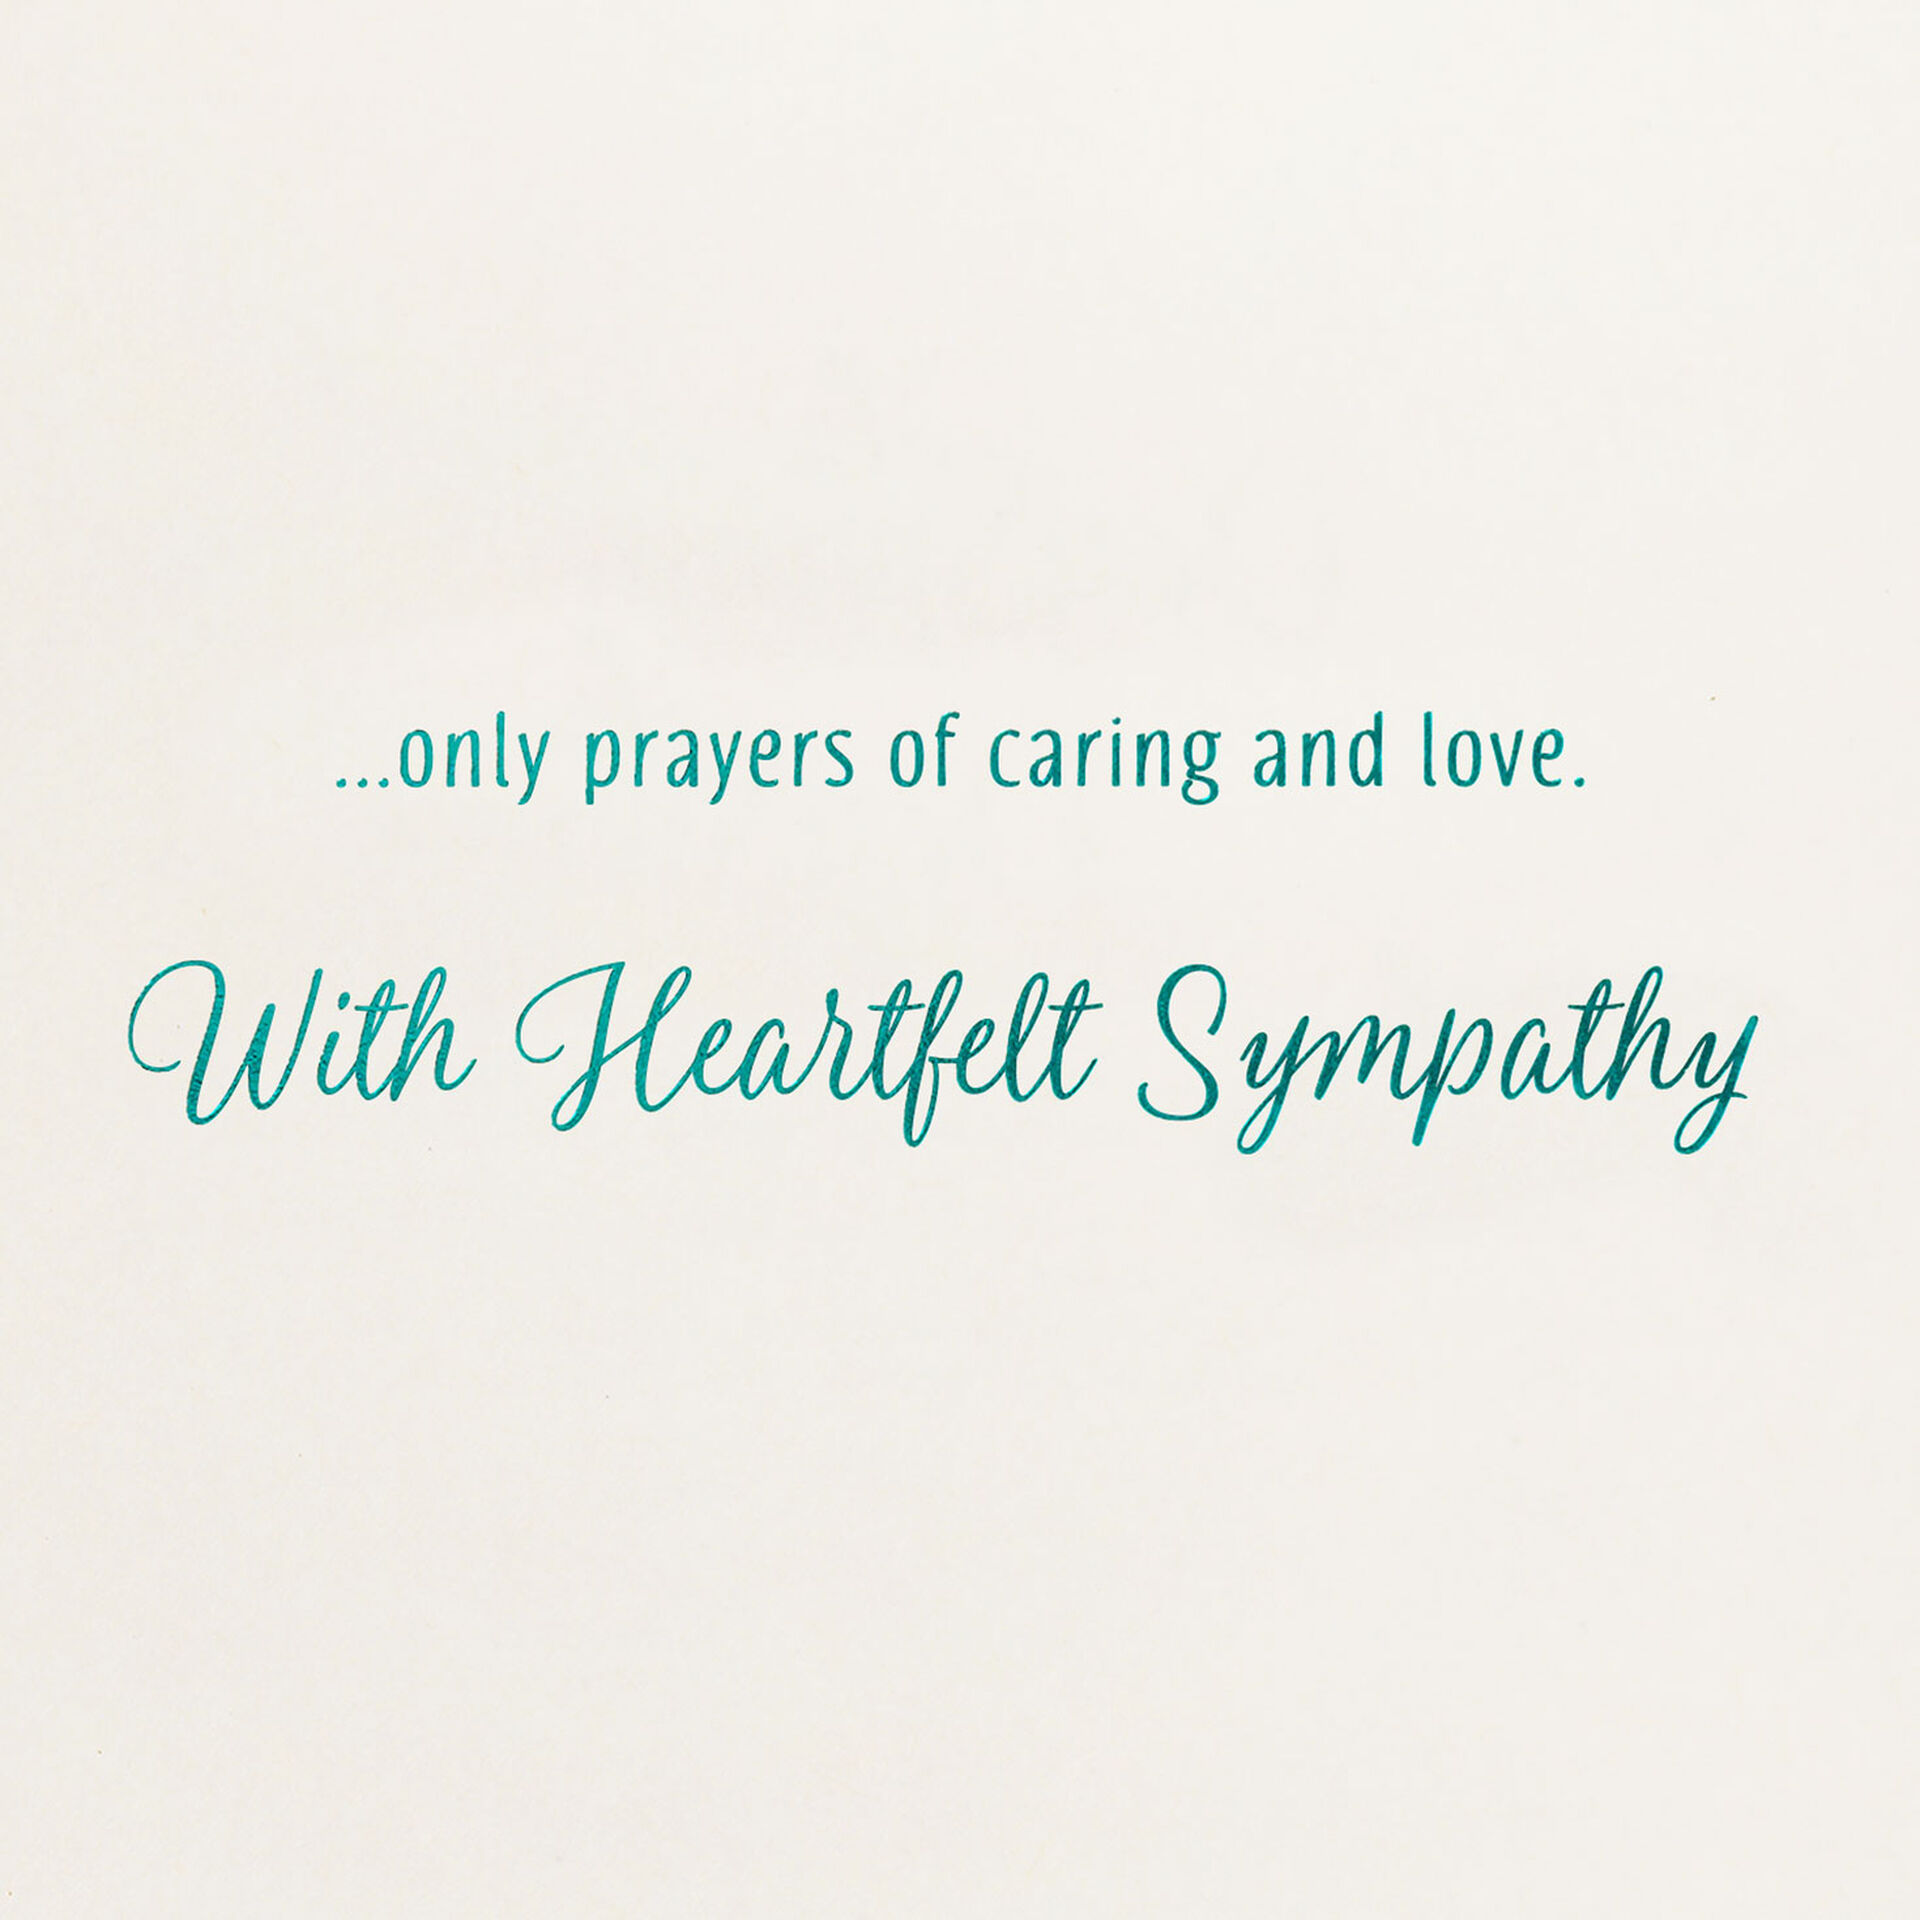 Prayers-of-Caring-and-Love-Religious-Sympathy-Card_459CEY2837_02